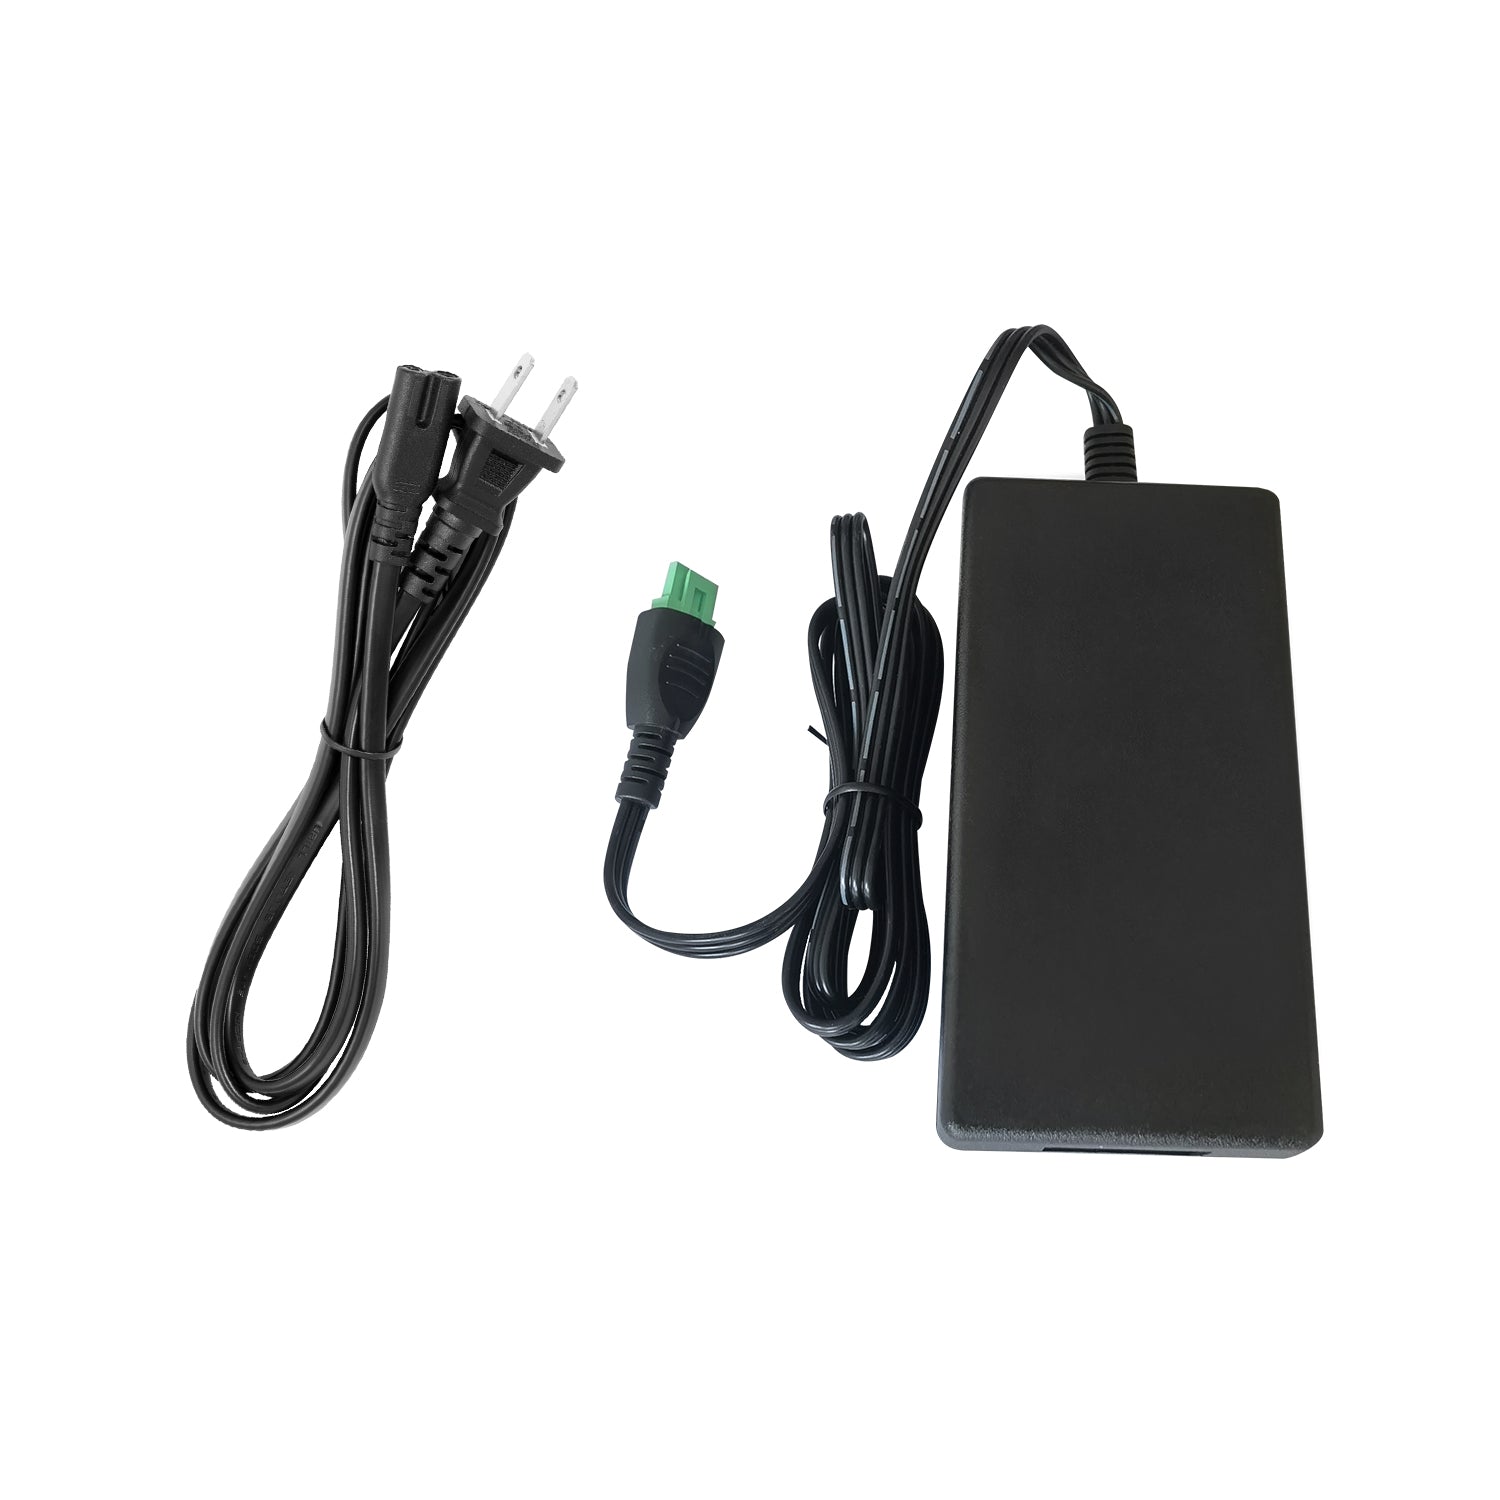 Power Adapter for HP Officejet 7612 All-in-One Printer.